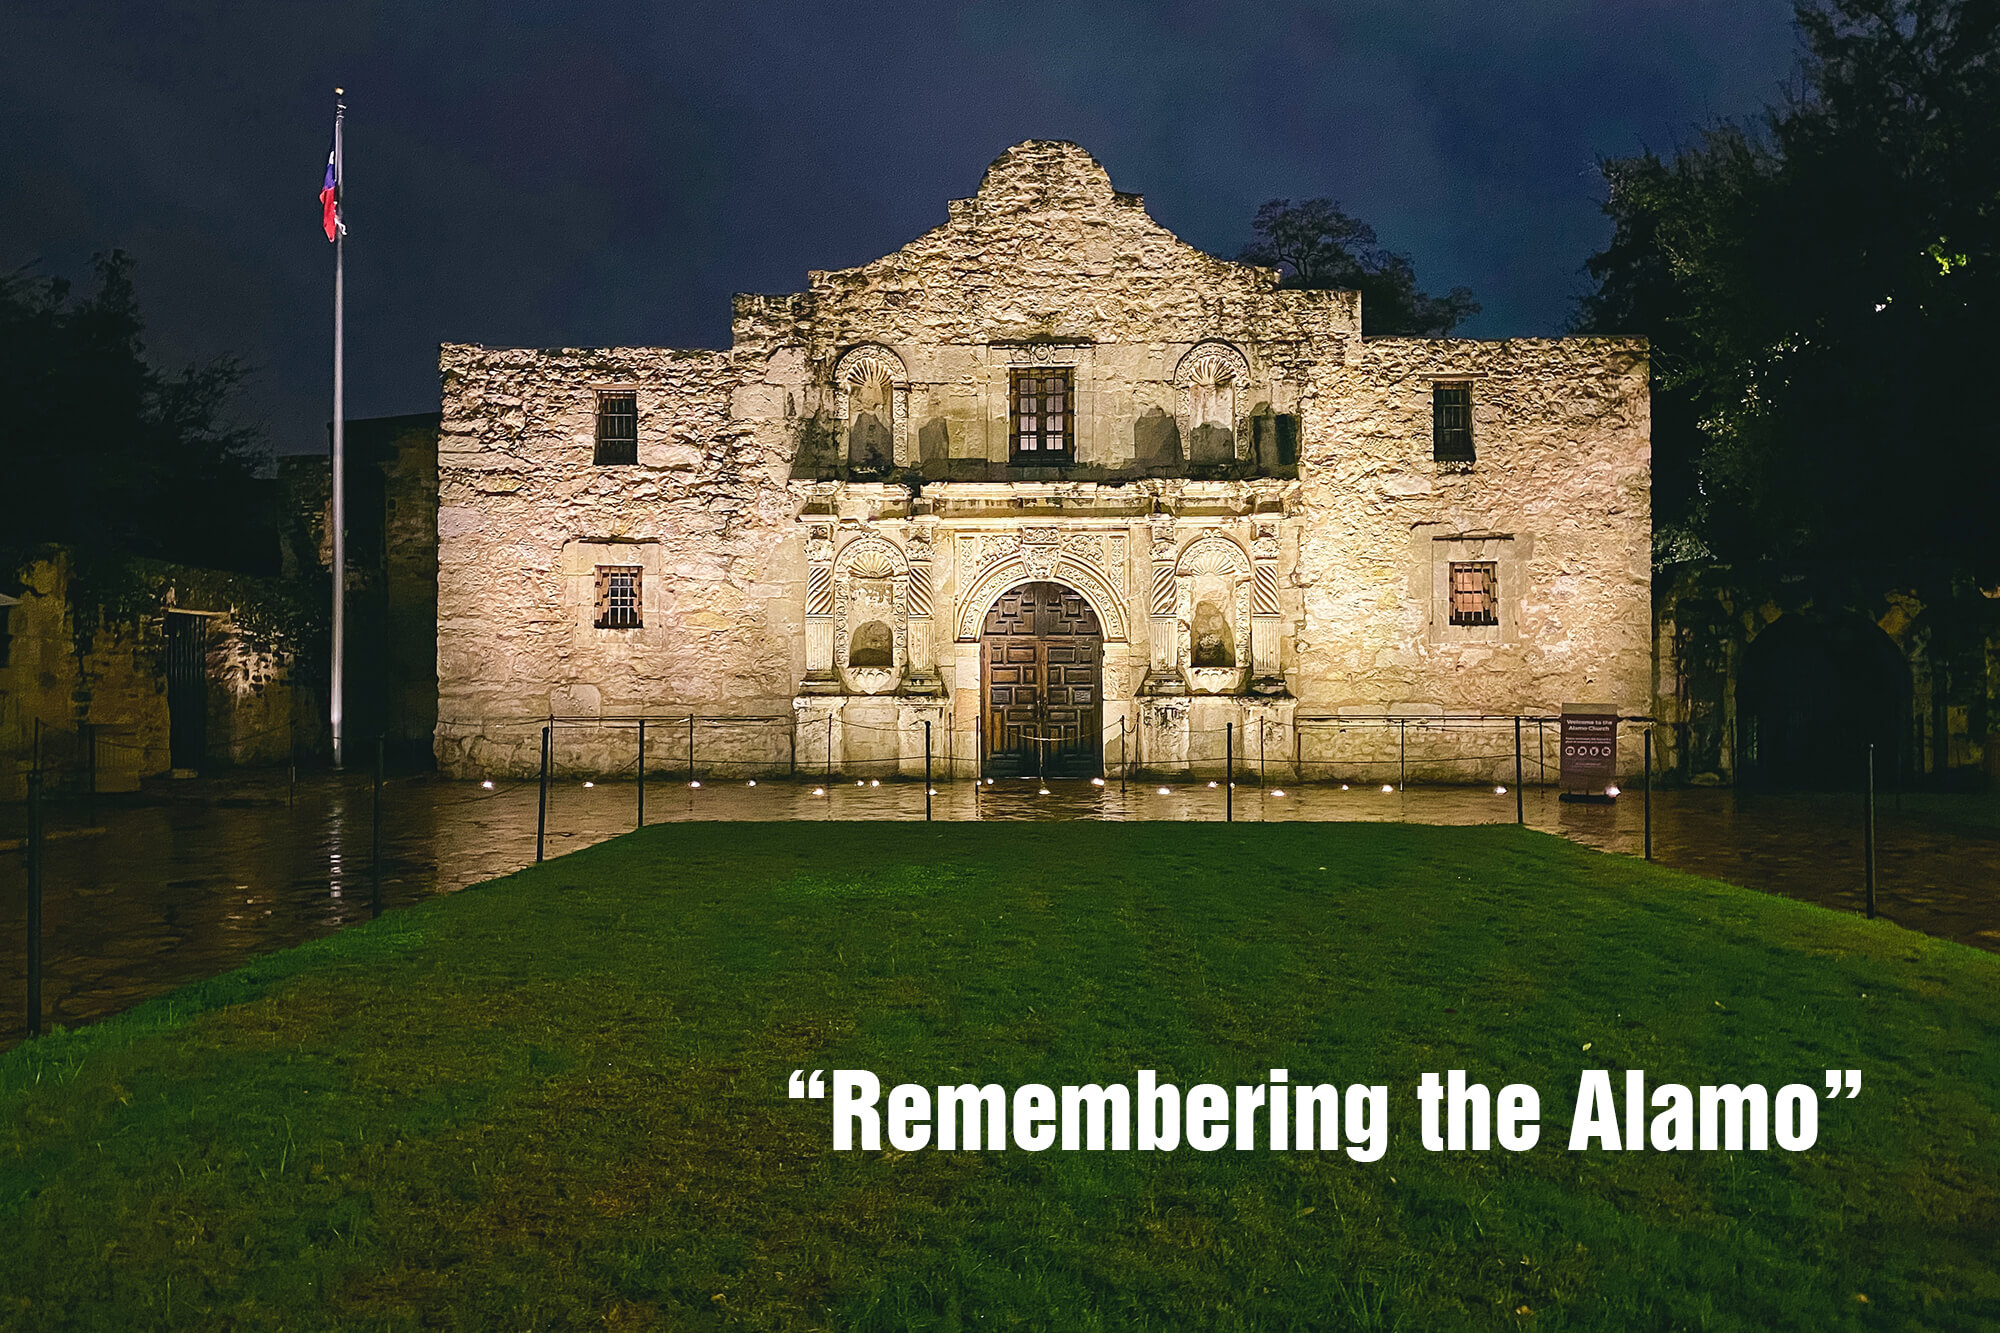 Photo of the Alamo at night with the words: "Remembering the Alamo."